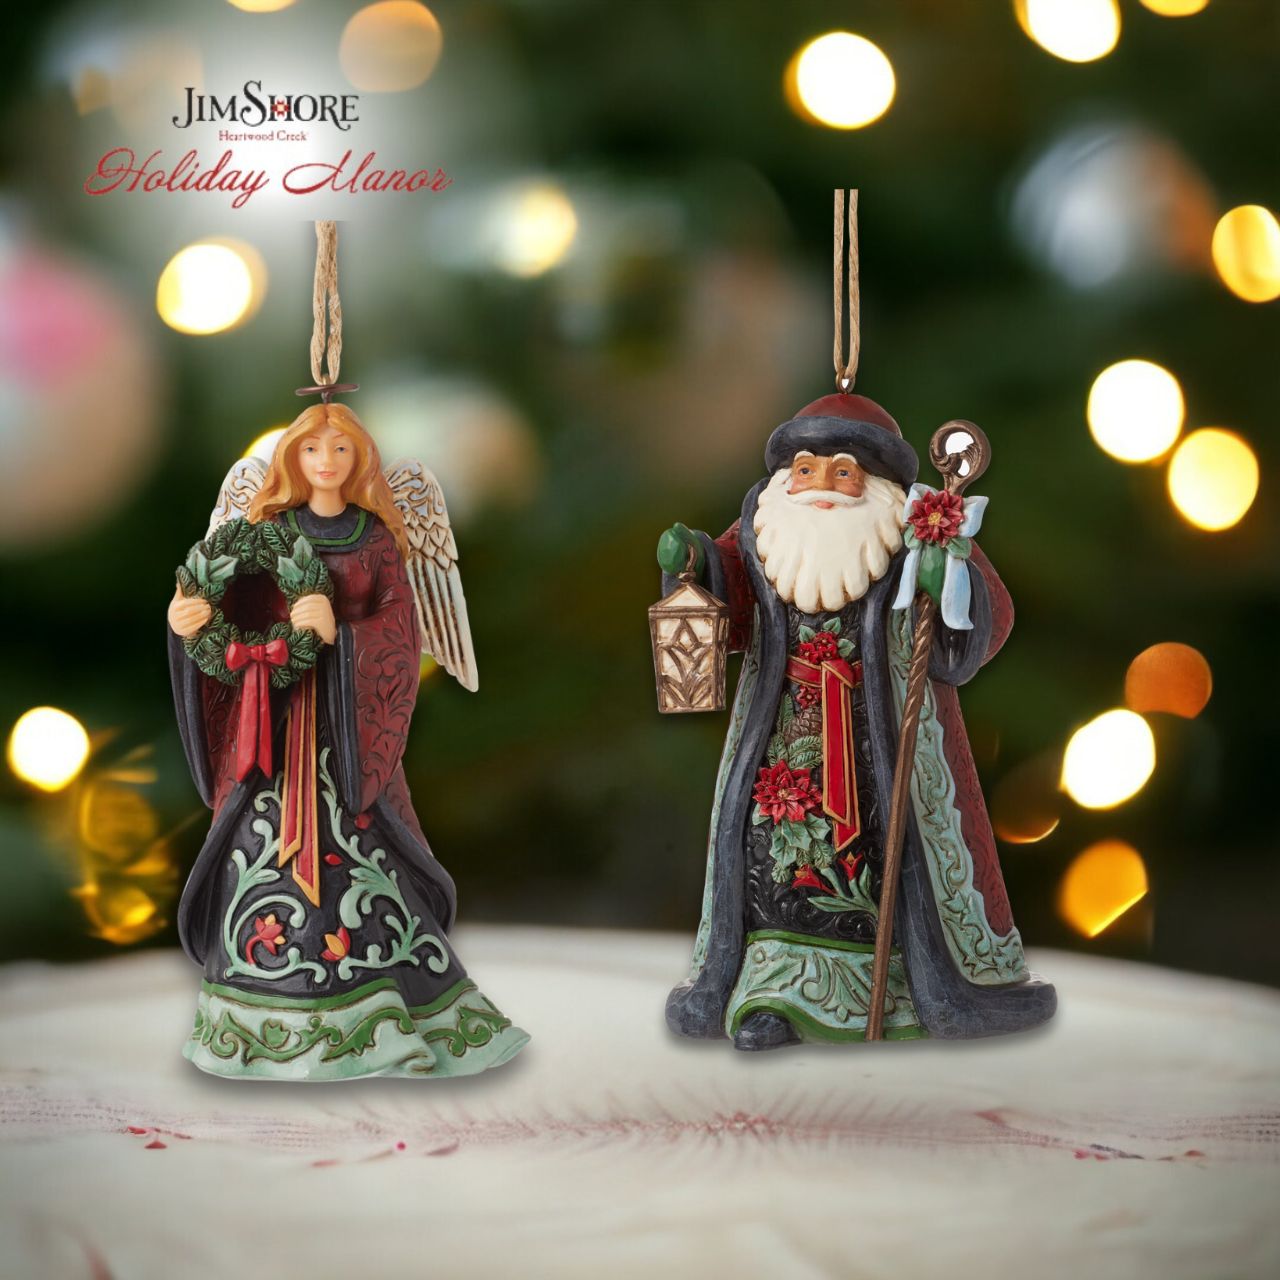 Heartwood Creek Holiday Manor Santa with Lantern Hanging Ornament  Designed by award winning artist Jim Shore as part of the Heartwood Creek Holiday Manor Collection, hand crafted using high quality cast stone and hand painted, this Santa with lantern hanging ornament is perfect for the Christmas season.